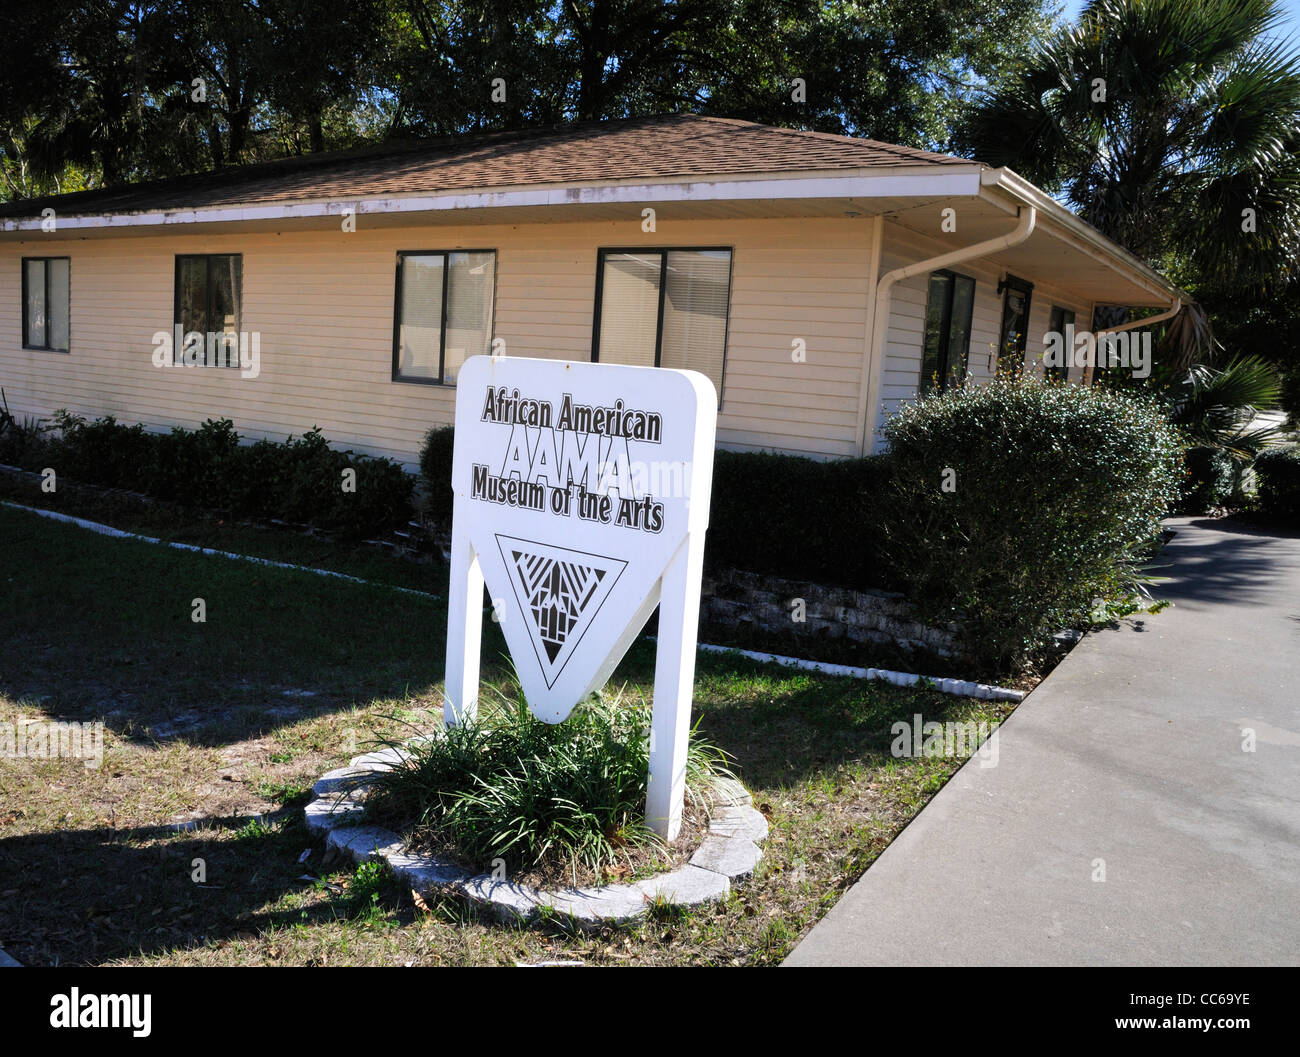 African American Museum of the Arts, DeLand, Florida Stockfoto